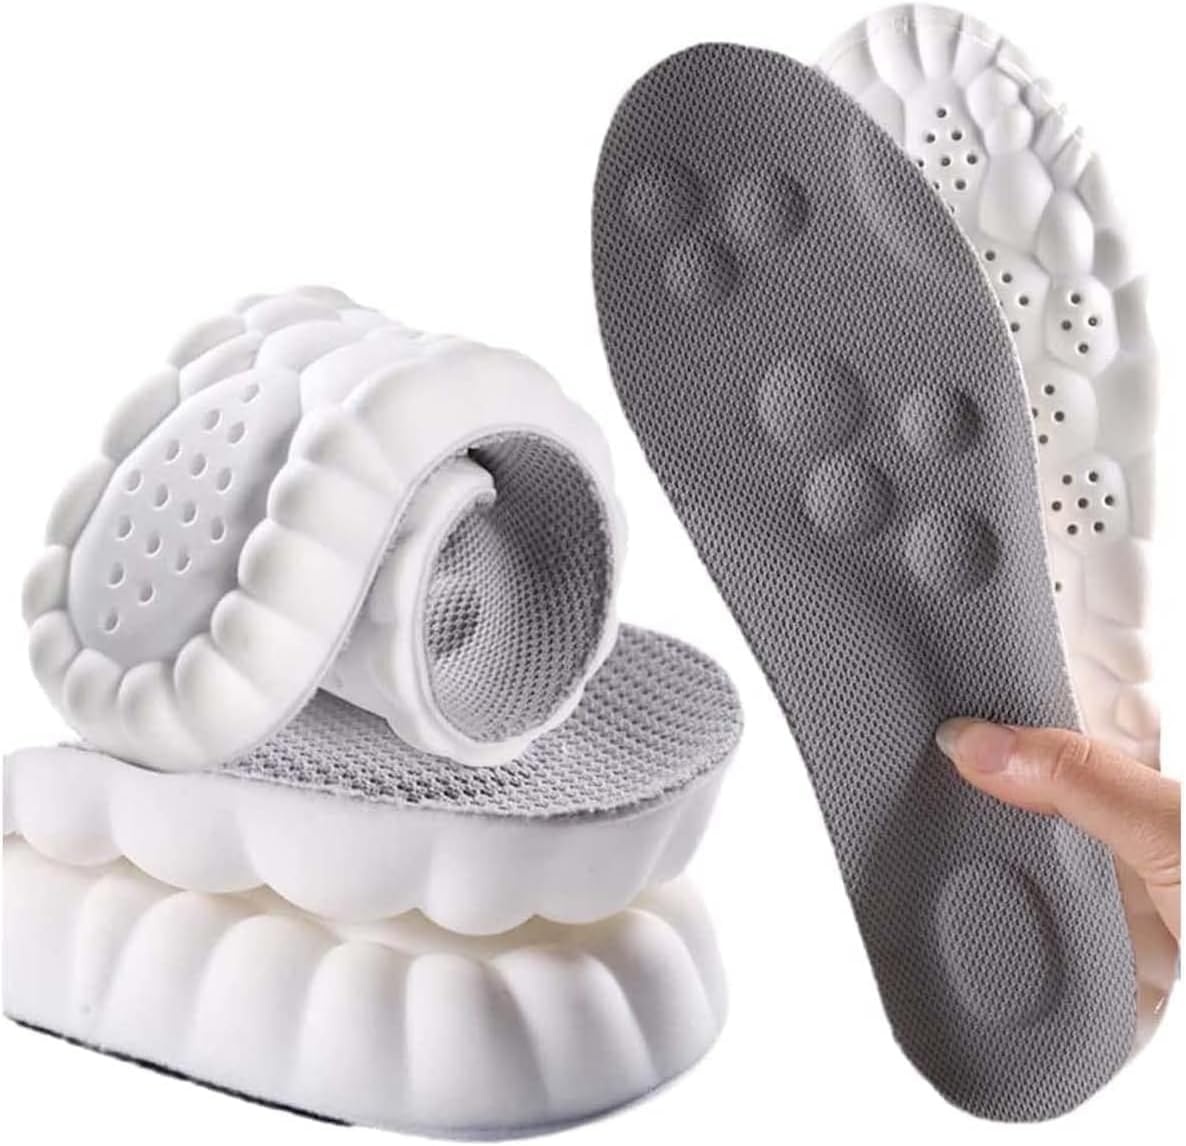 4D Insoles-4D Cloud Technology Insole,Metatarsal Orthotic Insoles Arch Supports Inserts, High-Elastic Shock-Absorbing Insoles,Plantar Fasciitis, Ball of Foot Pain Relief (37-38, gray)